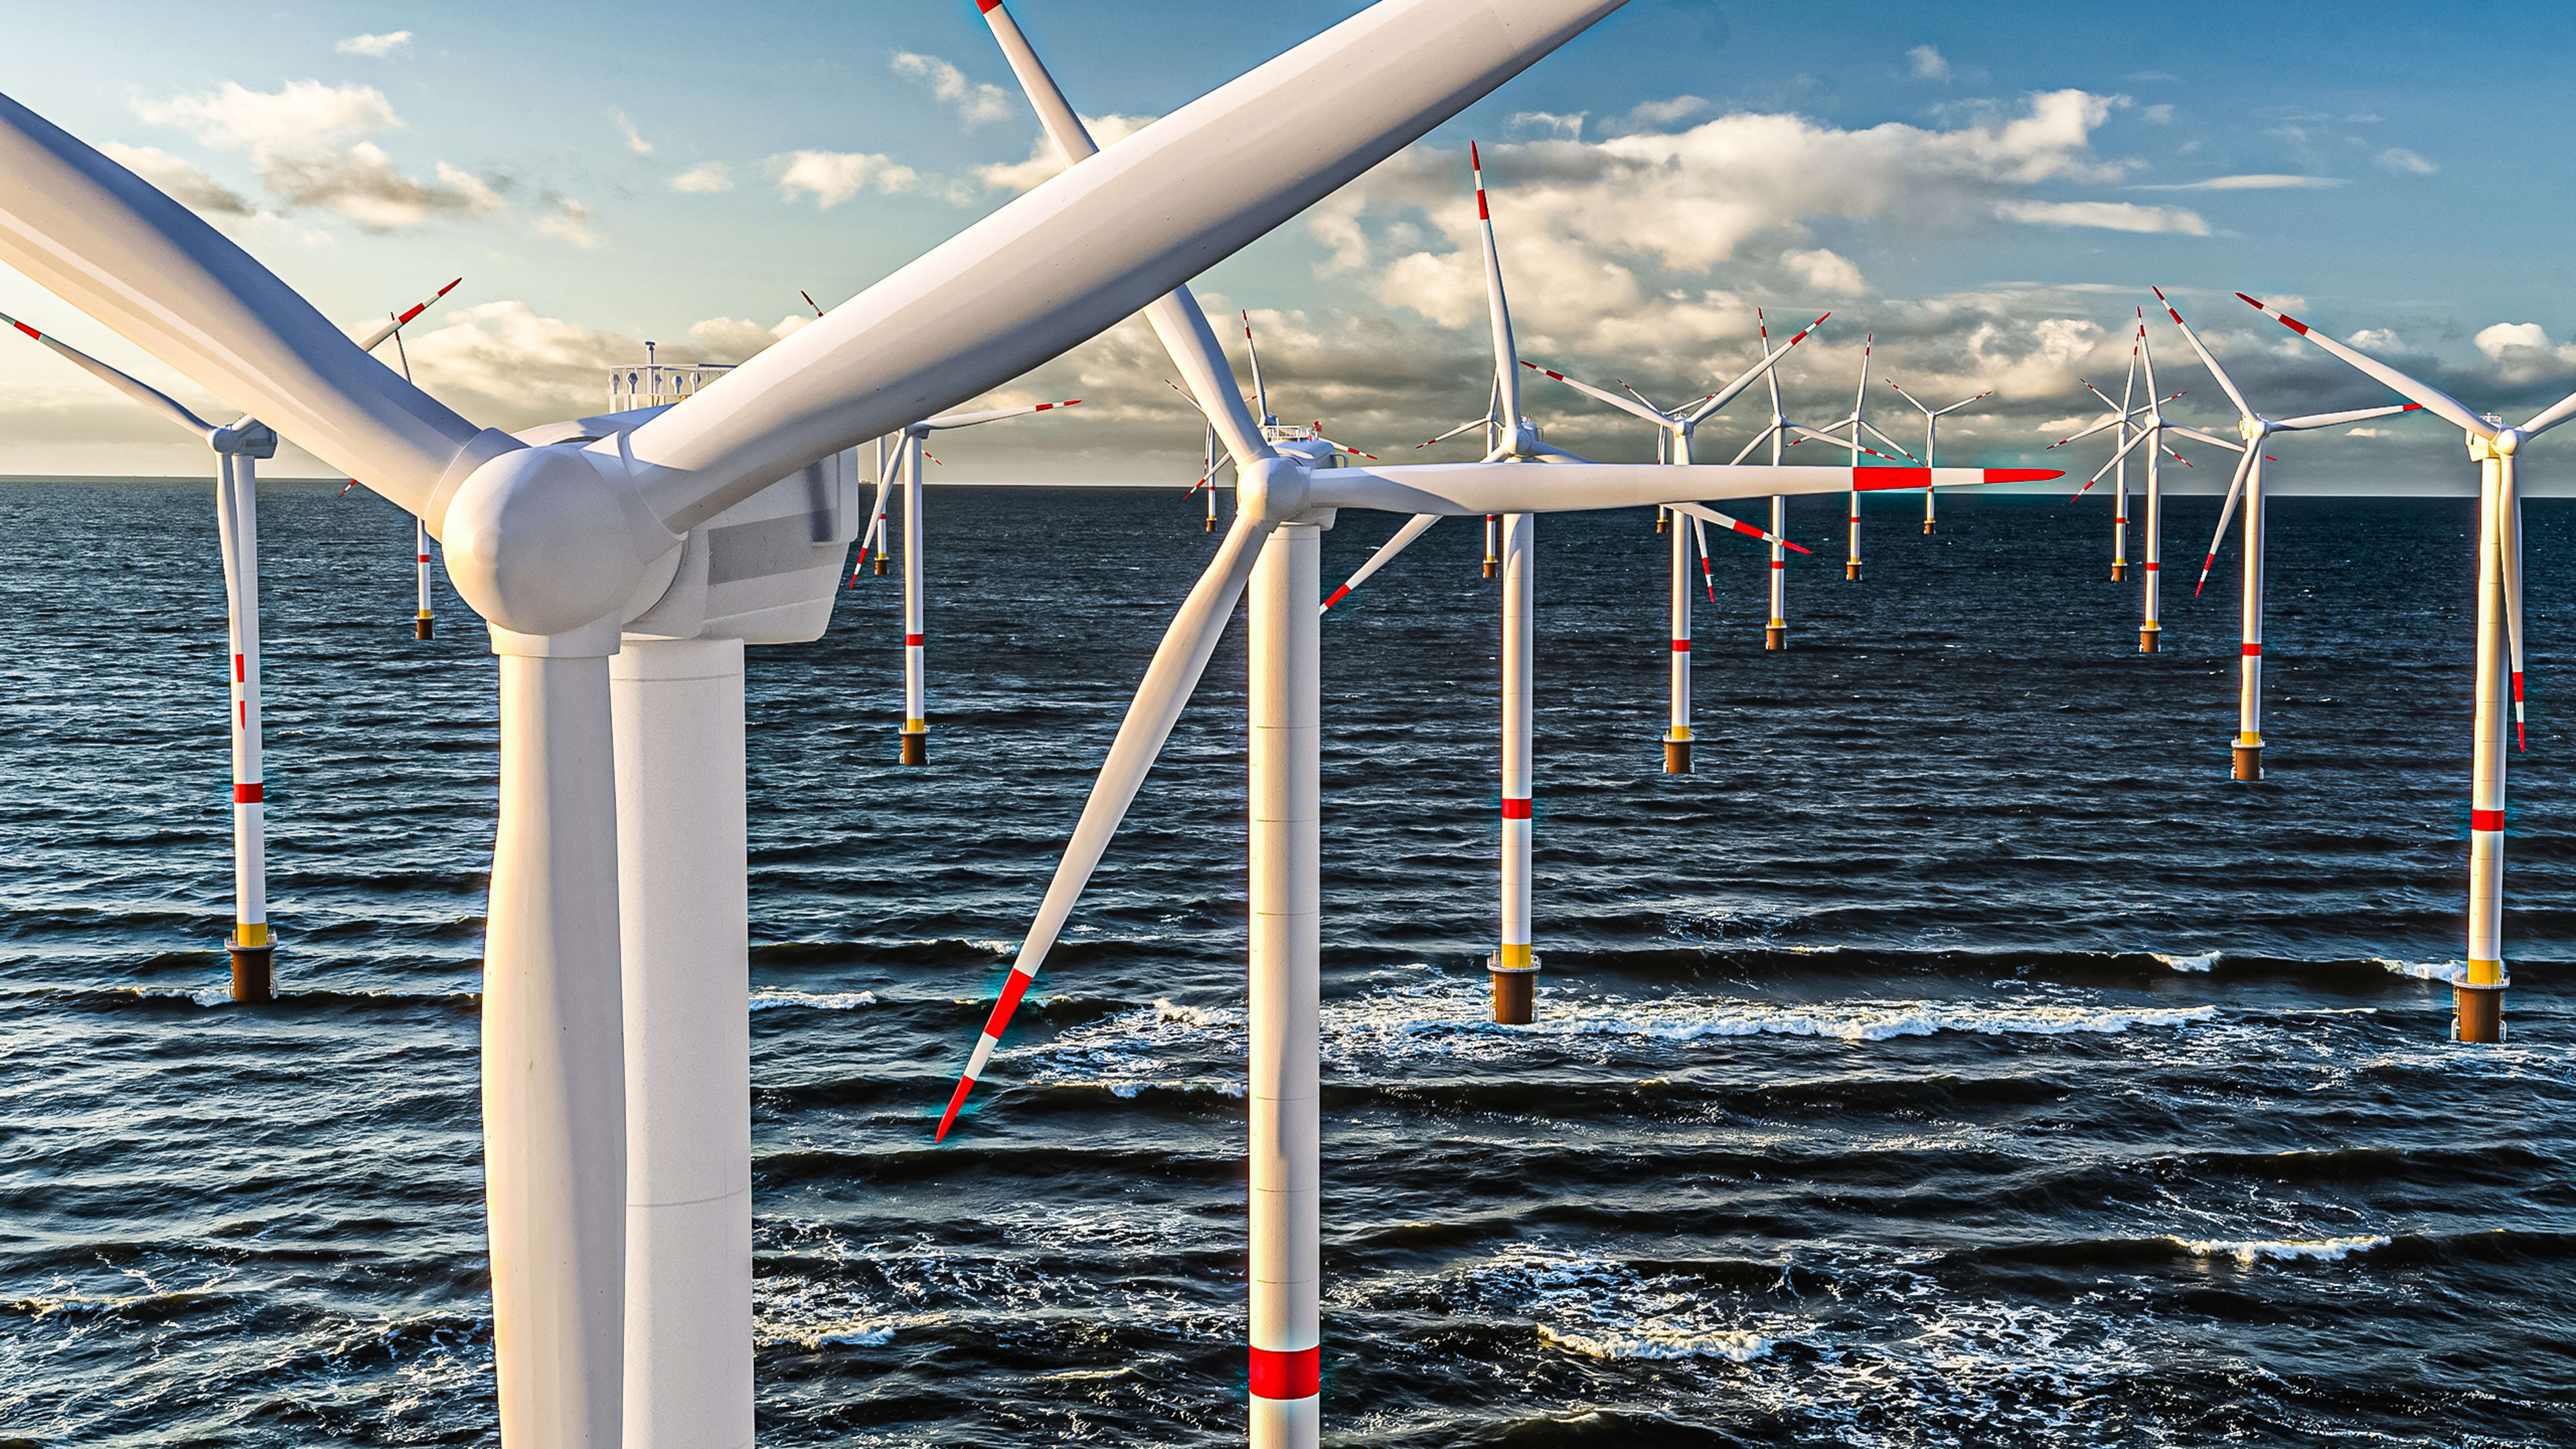 A massive offshore wind farm just got approved off the coast of New Jersey